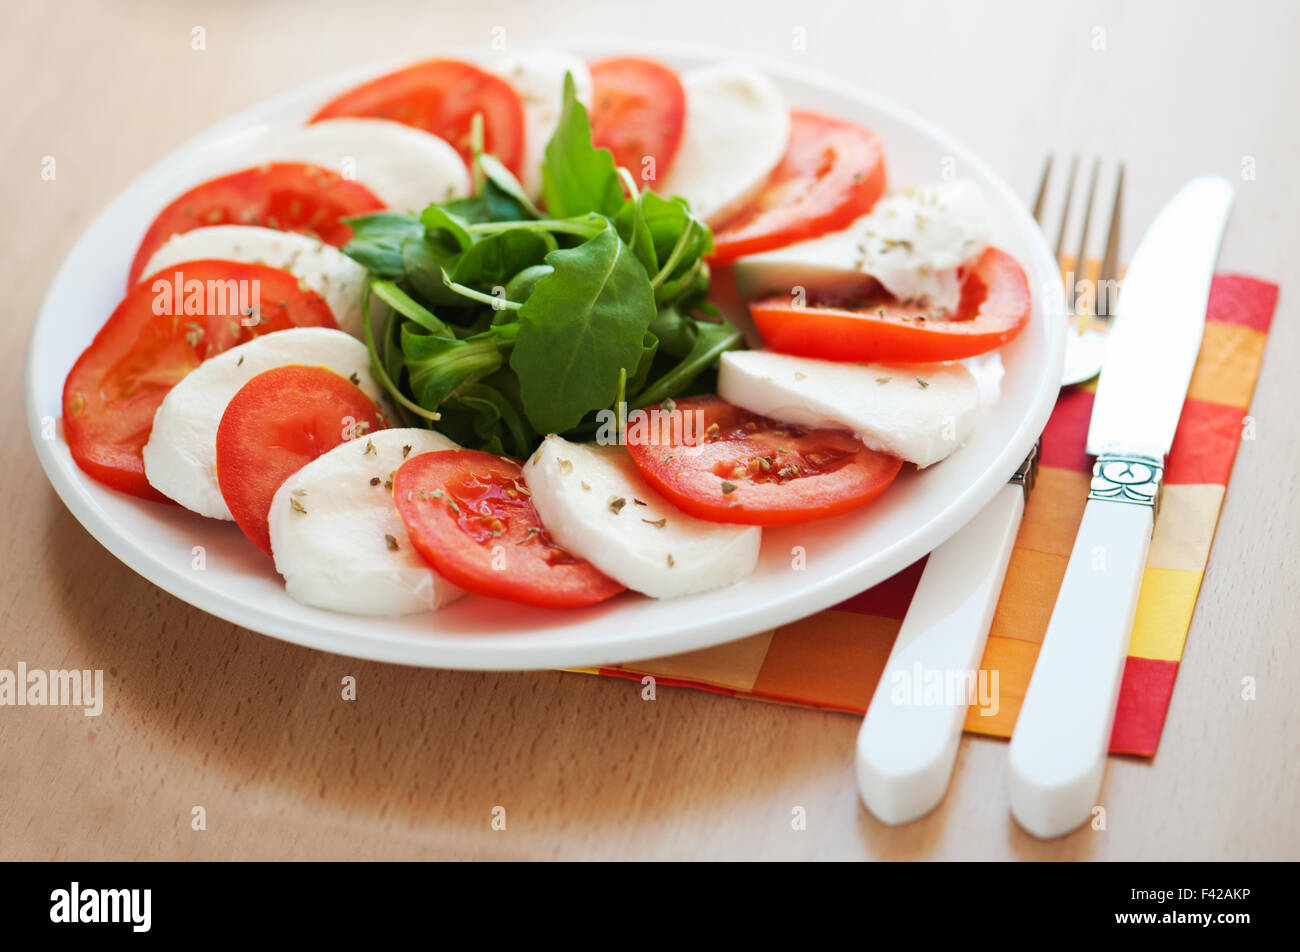 Italian salad with tomatoes and mozzarella with a fork and knife Stock Photo